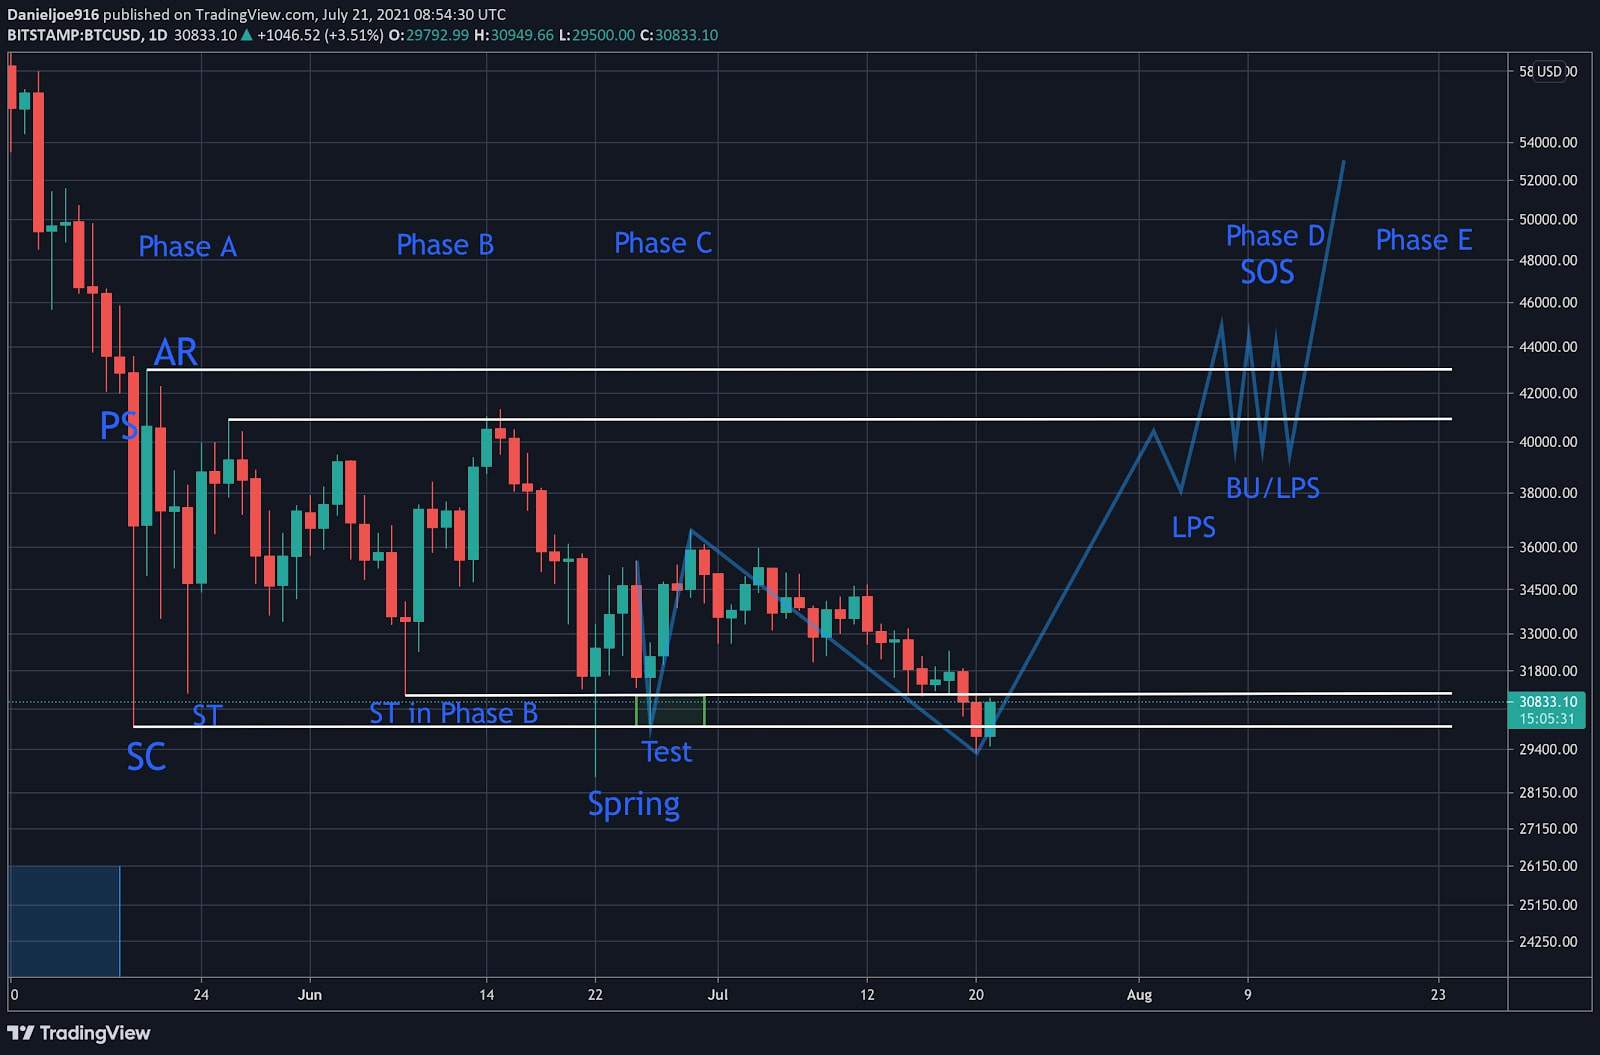 The-wyckoff-accumulation:-after-bitcoin’s-$30k-breakdown,is-structure-still-intact?